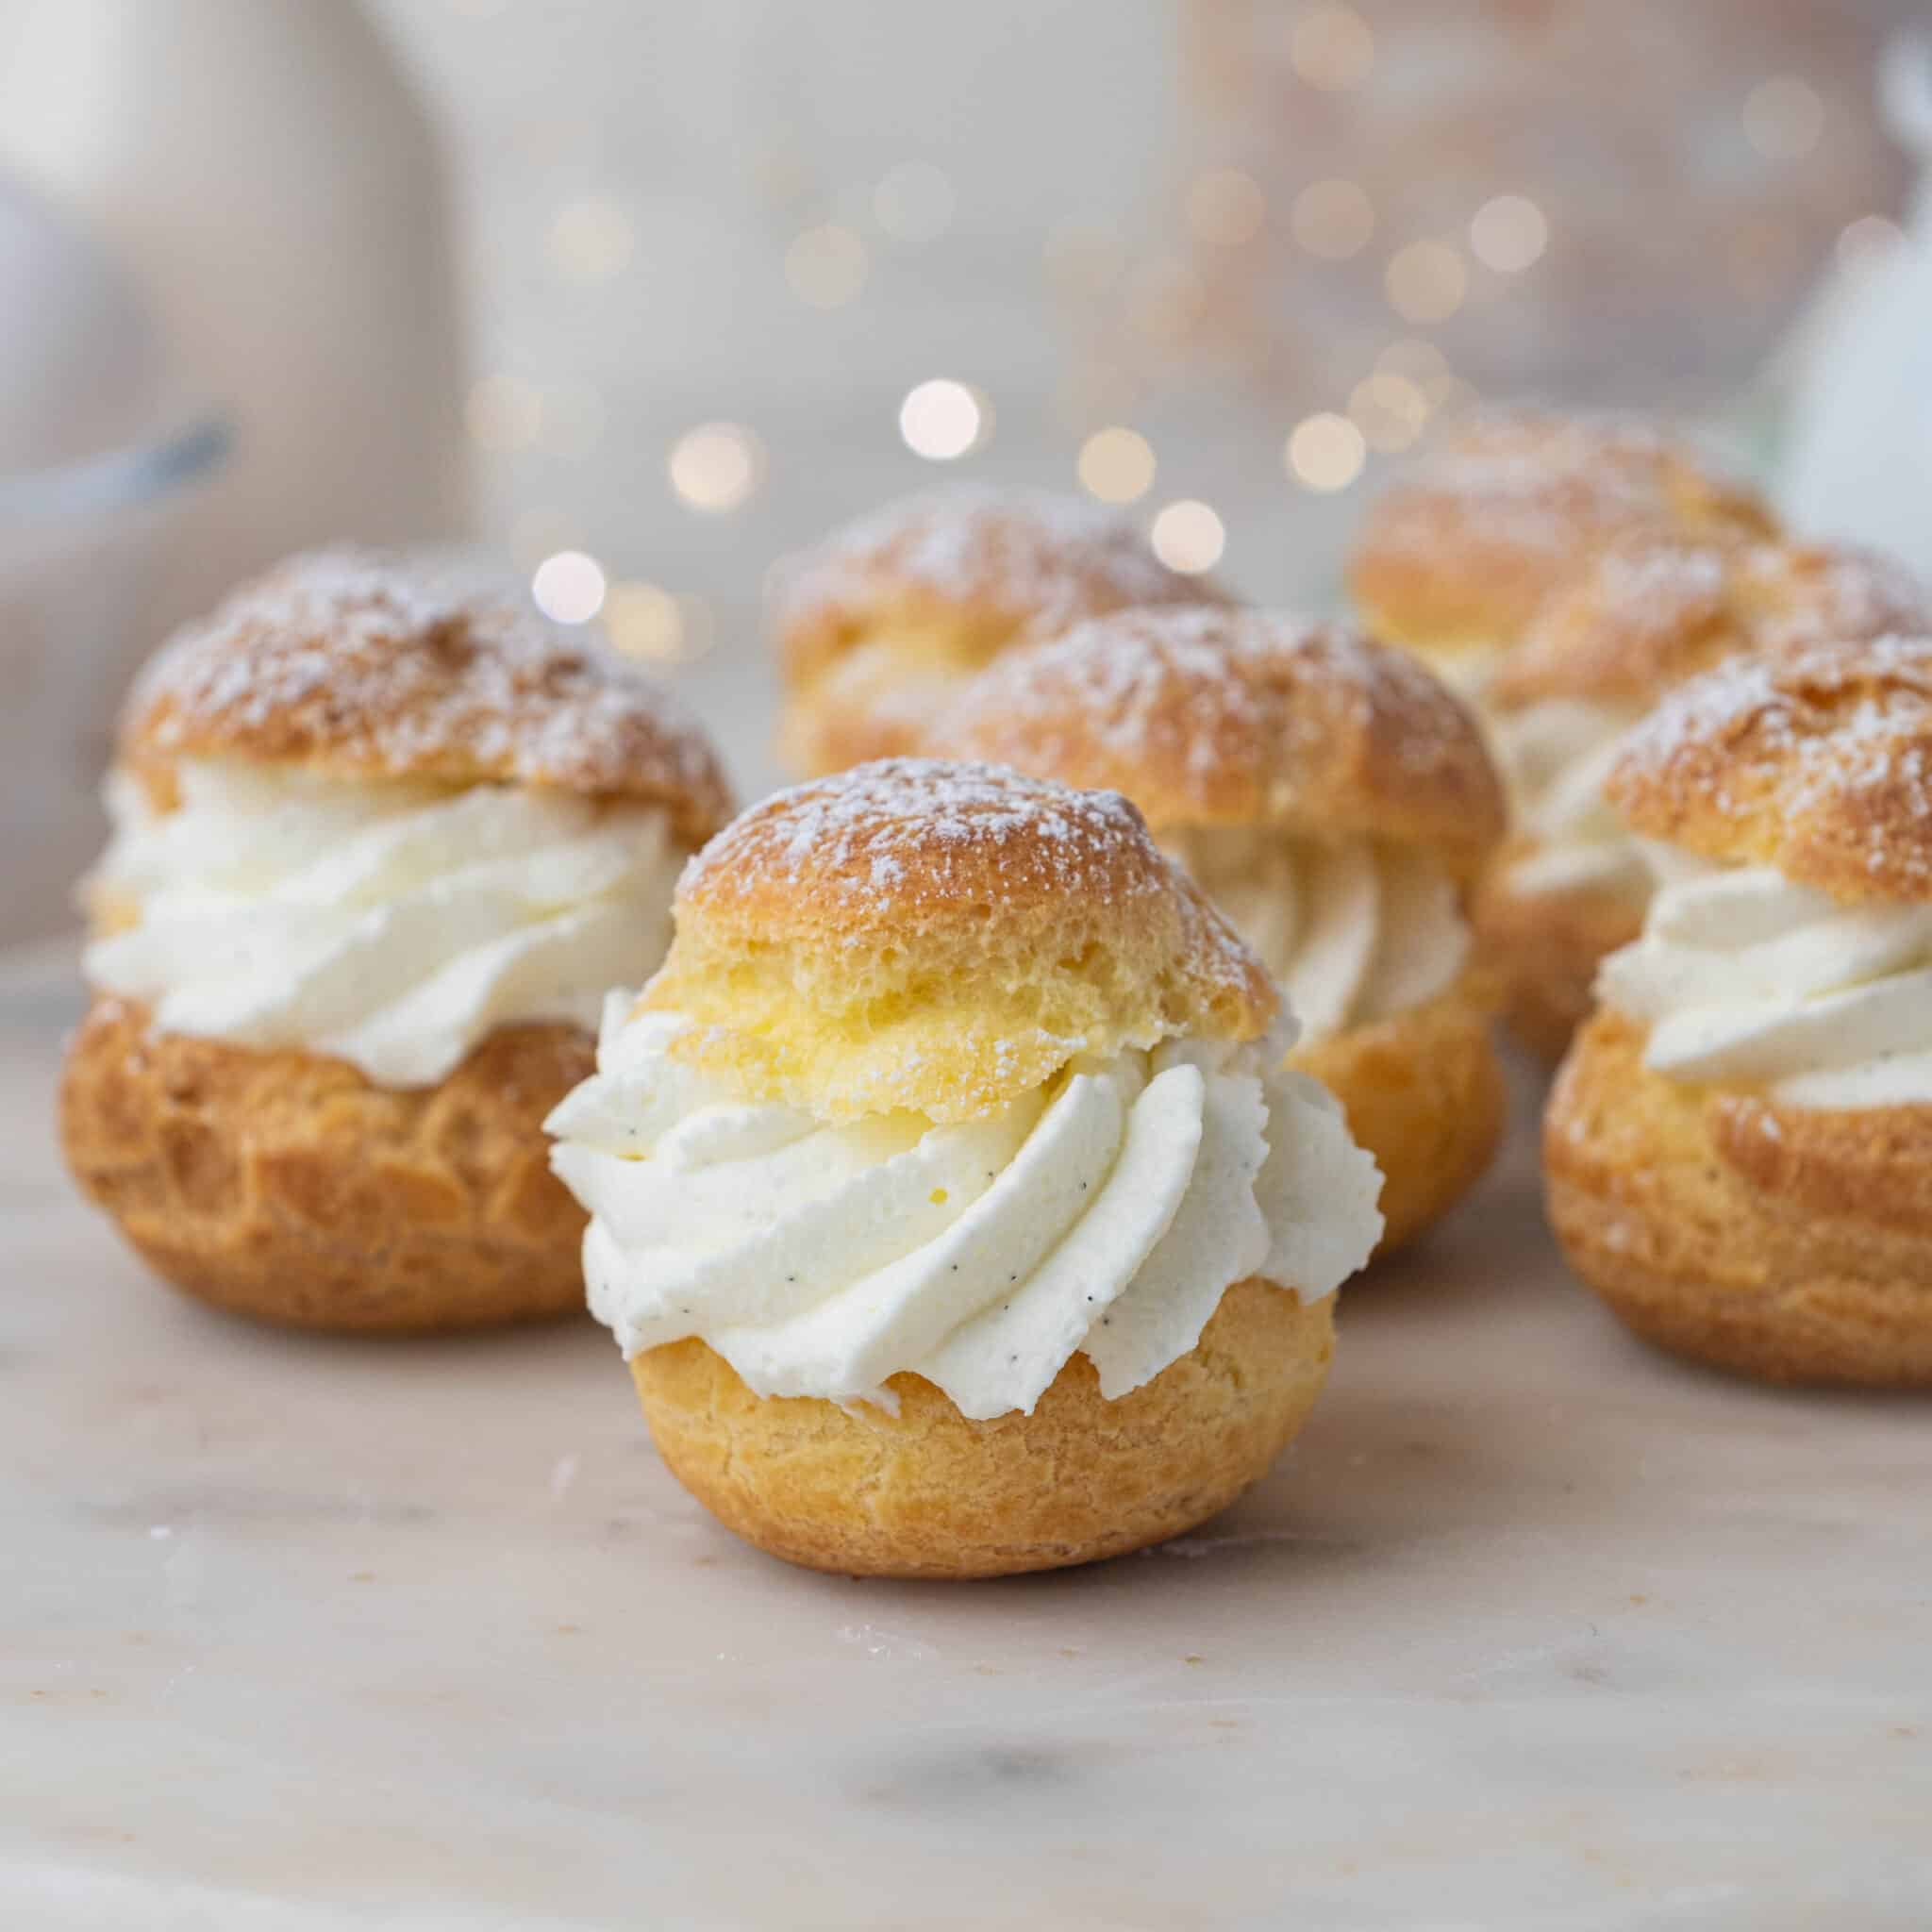 photo of cream puffs filled with whipped cream